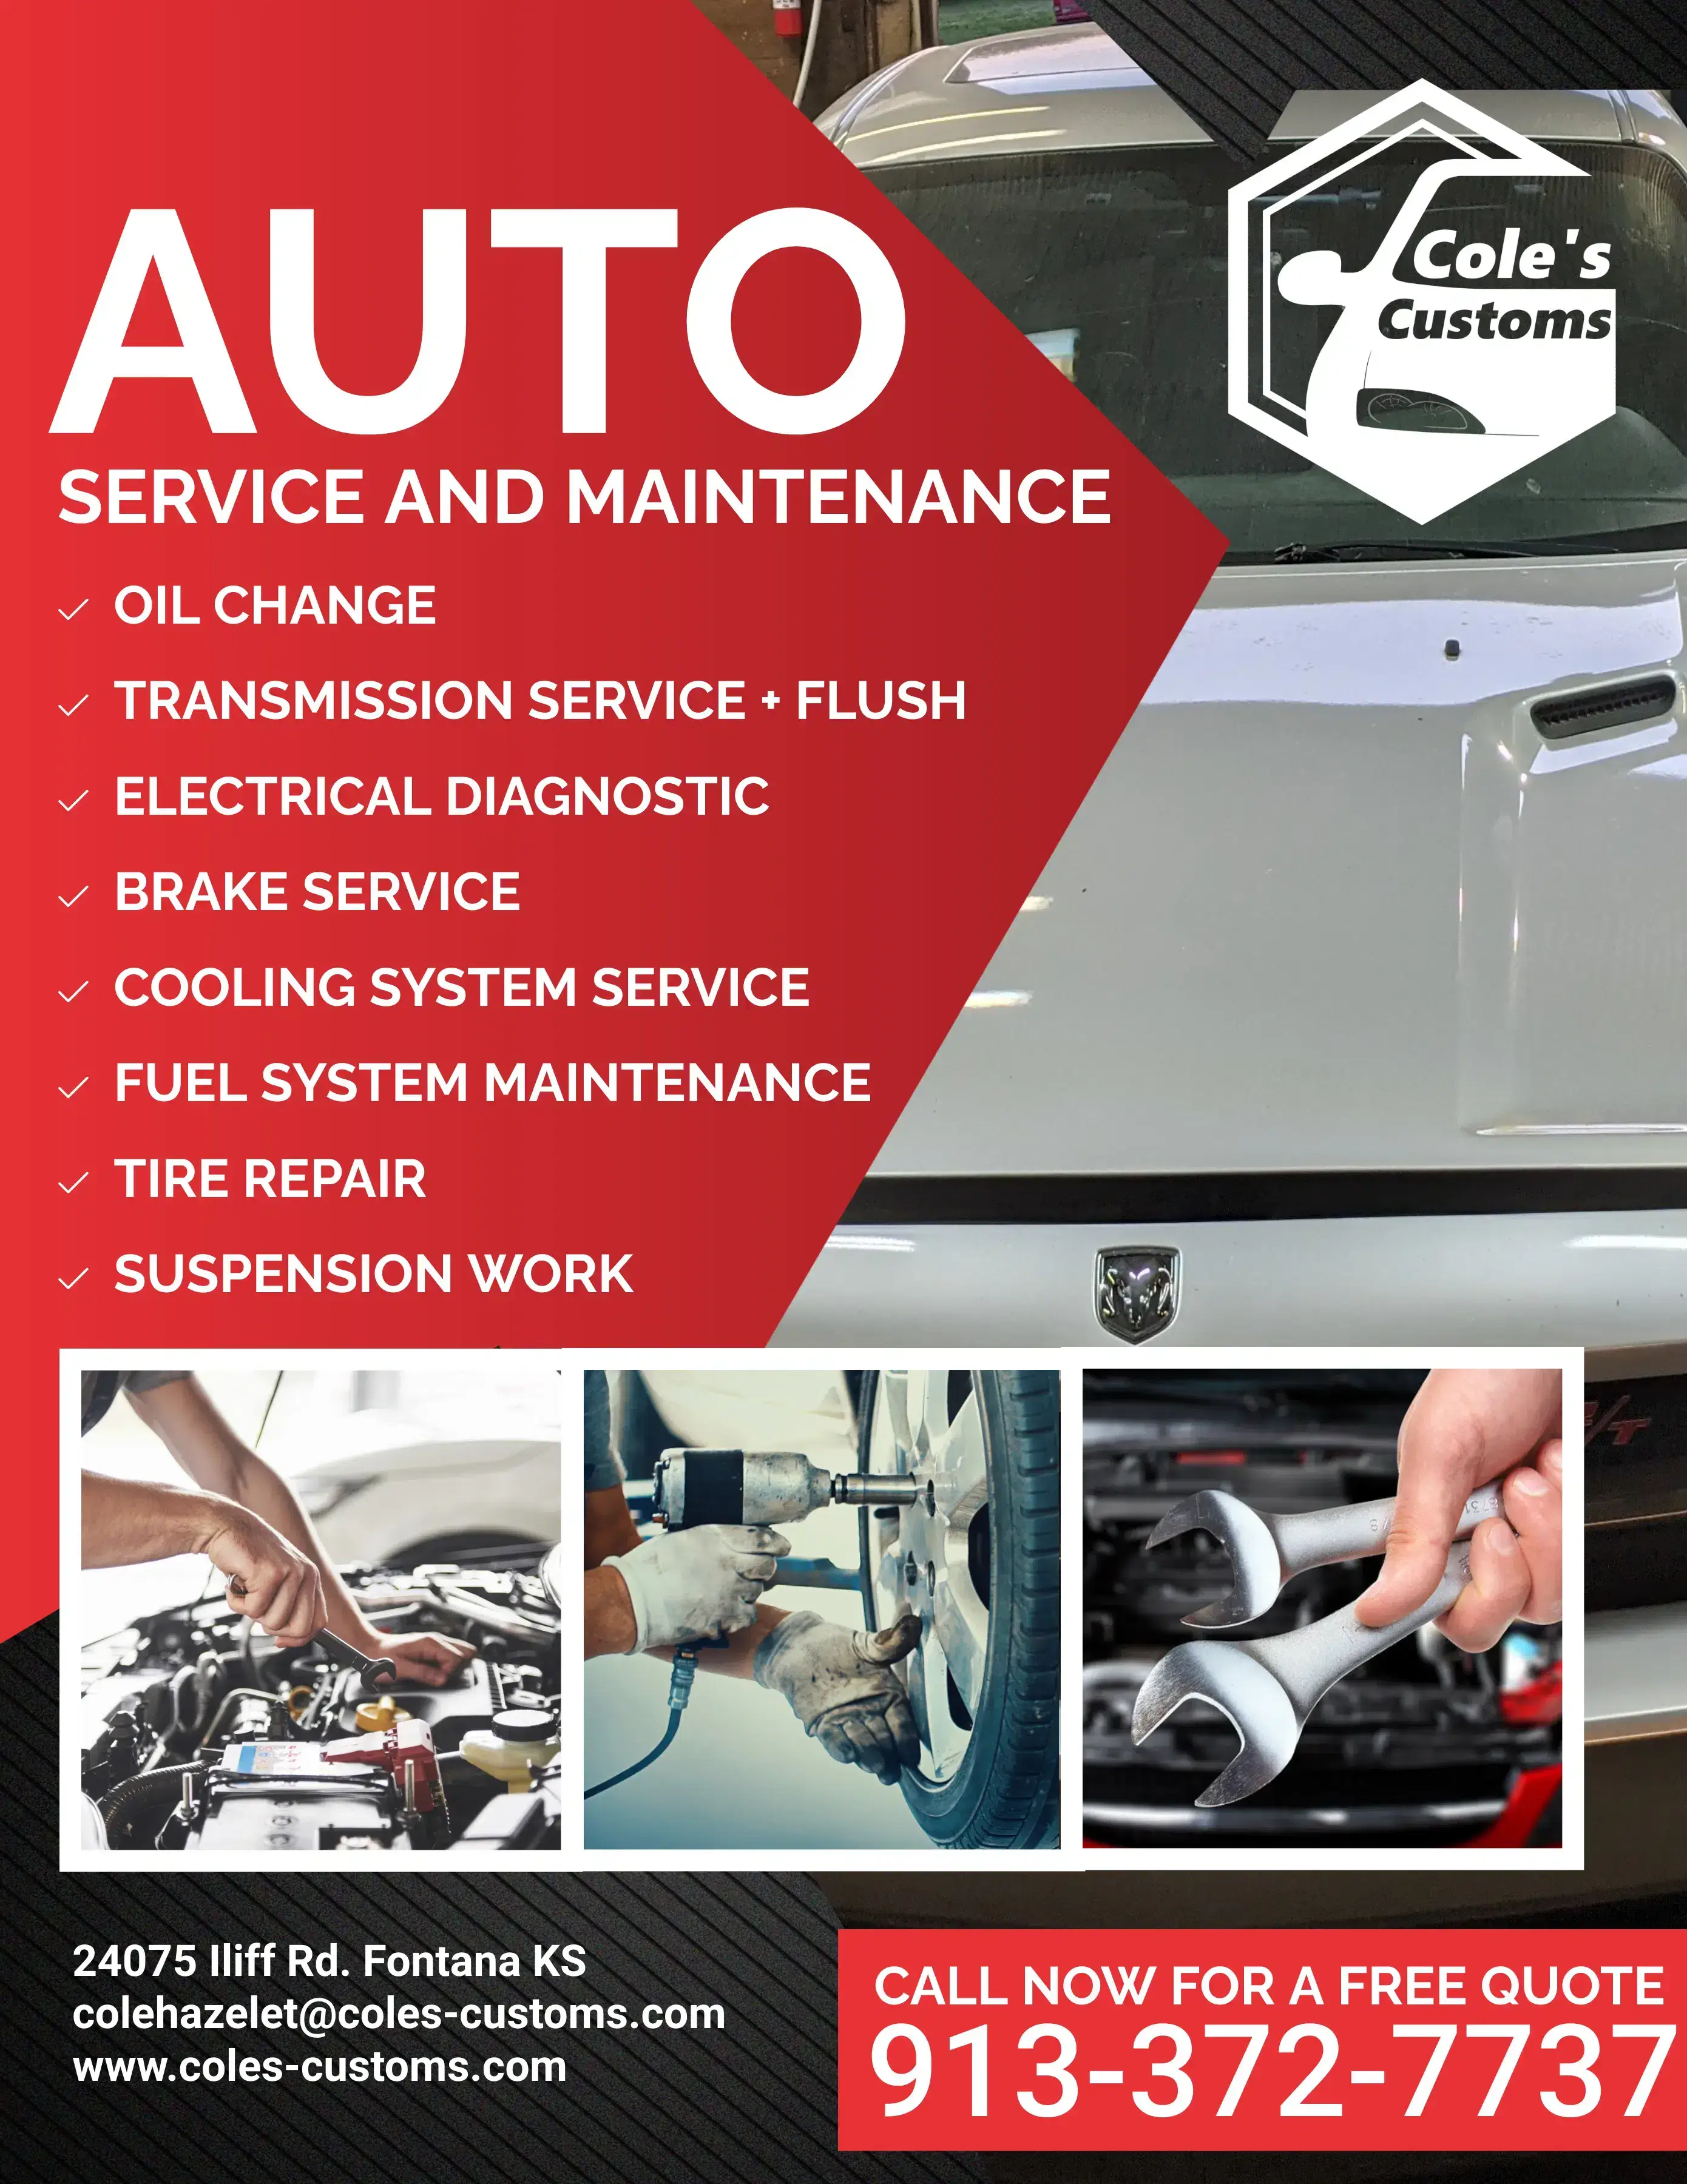 Auto-Service-and-Maintenance, Repair tire near me, new tires for cheap, local mechanic, oil and tire change near me, oil change discount tire, tire and brake shop near me, auto service and tire, automotive repair, automotive maintenance, oil change, Brake Services | cole's Customs